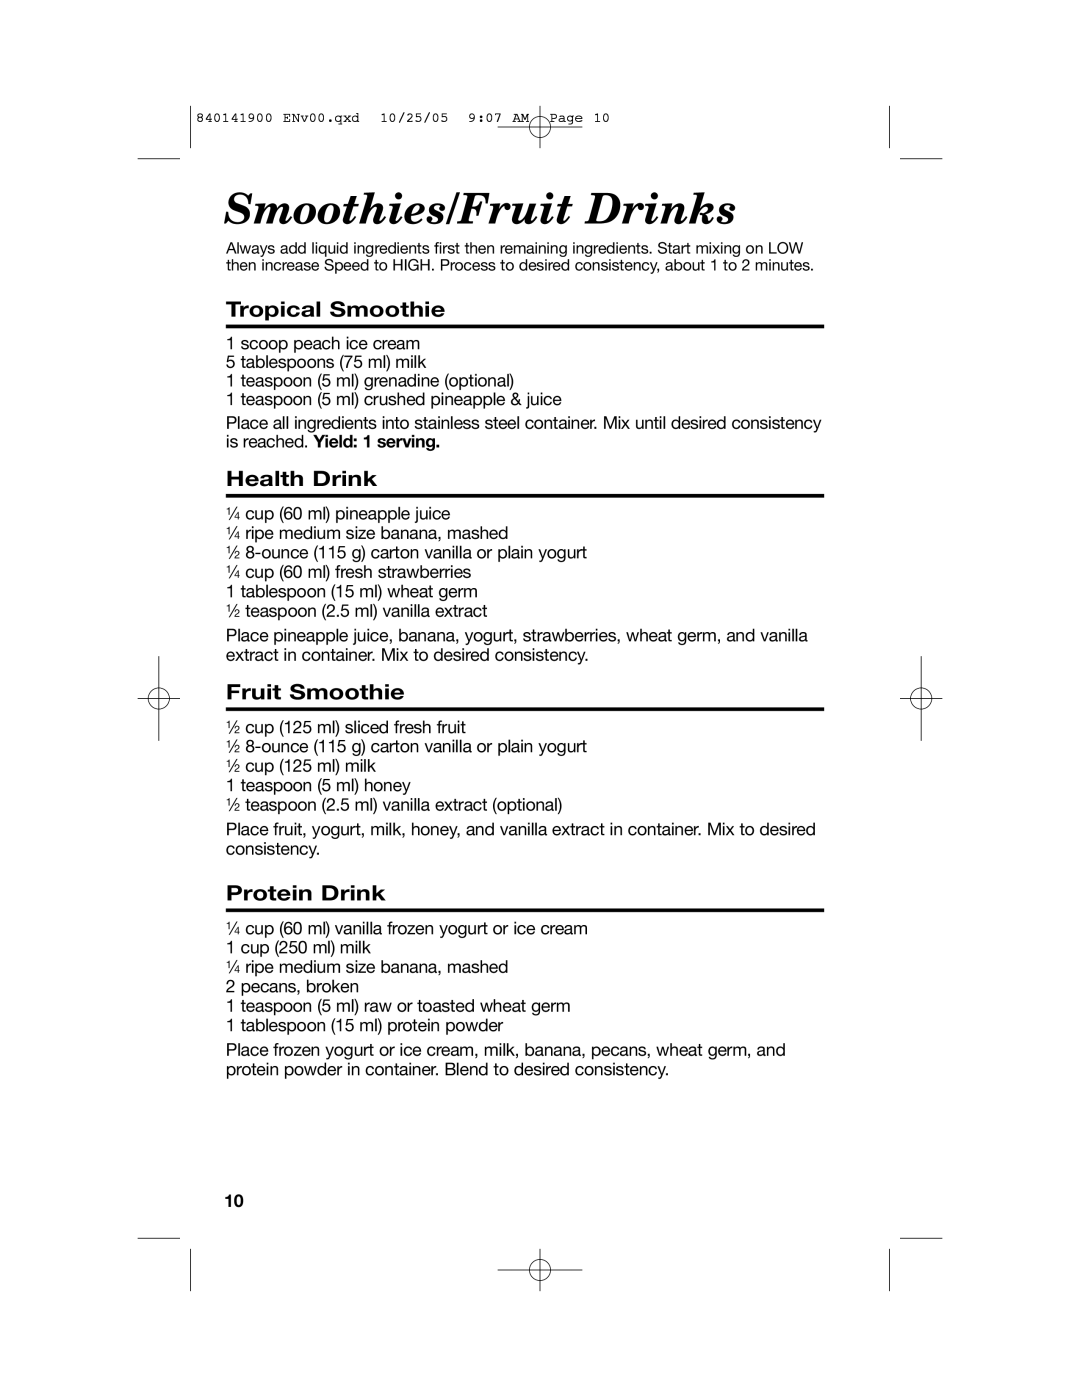 Hamilton Beach 840141900 manual Tropical Smoothie, Health Drink, Fruit Smoothie, Protein Drink, Smoothies/Fruit Drinks 